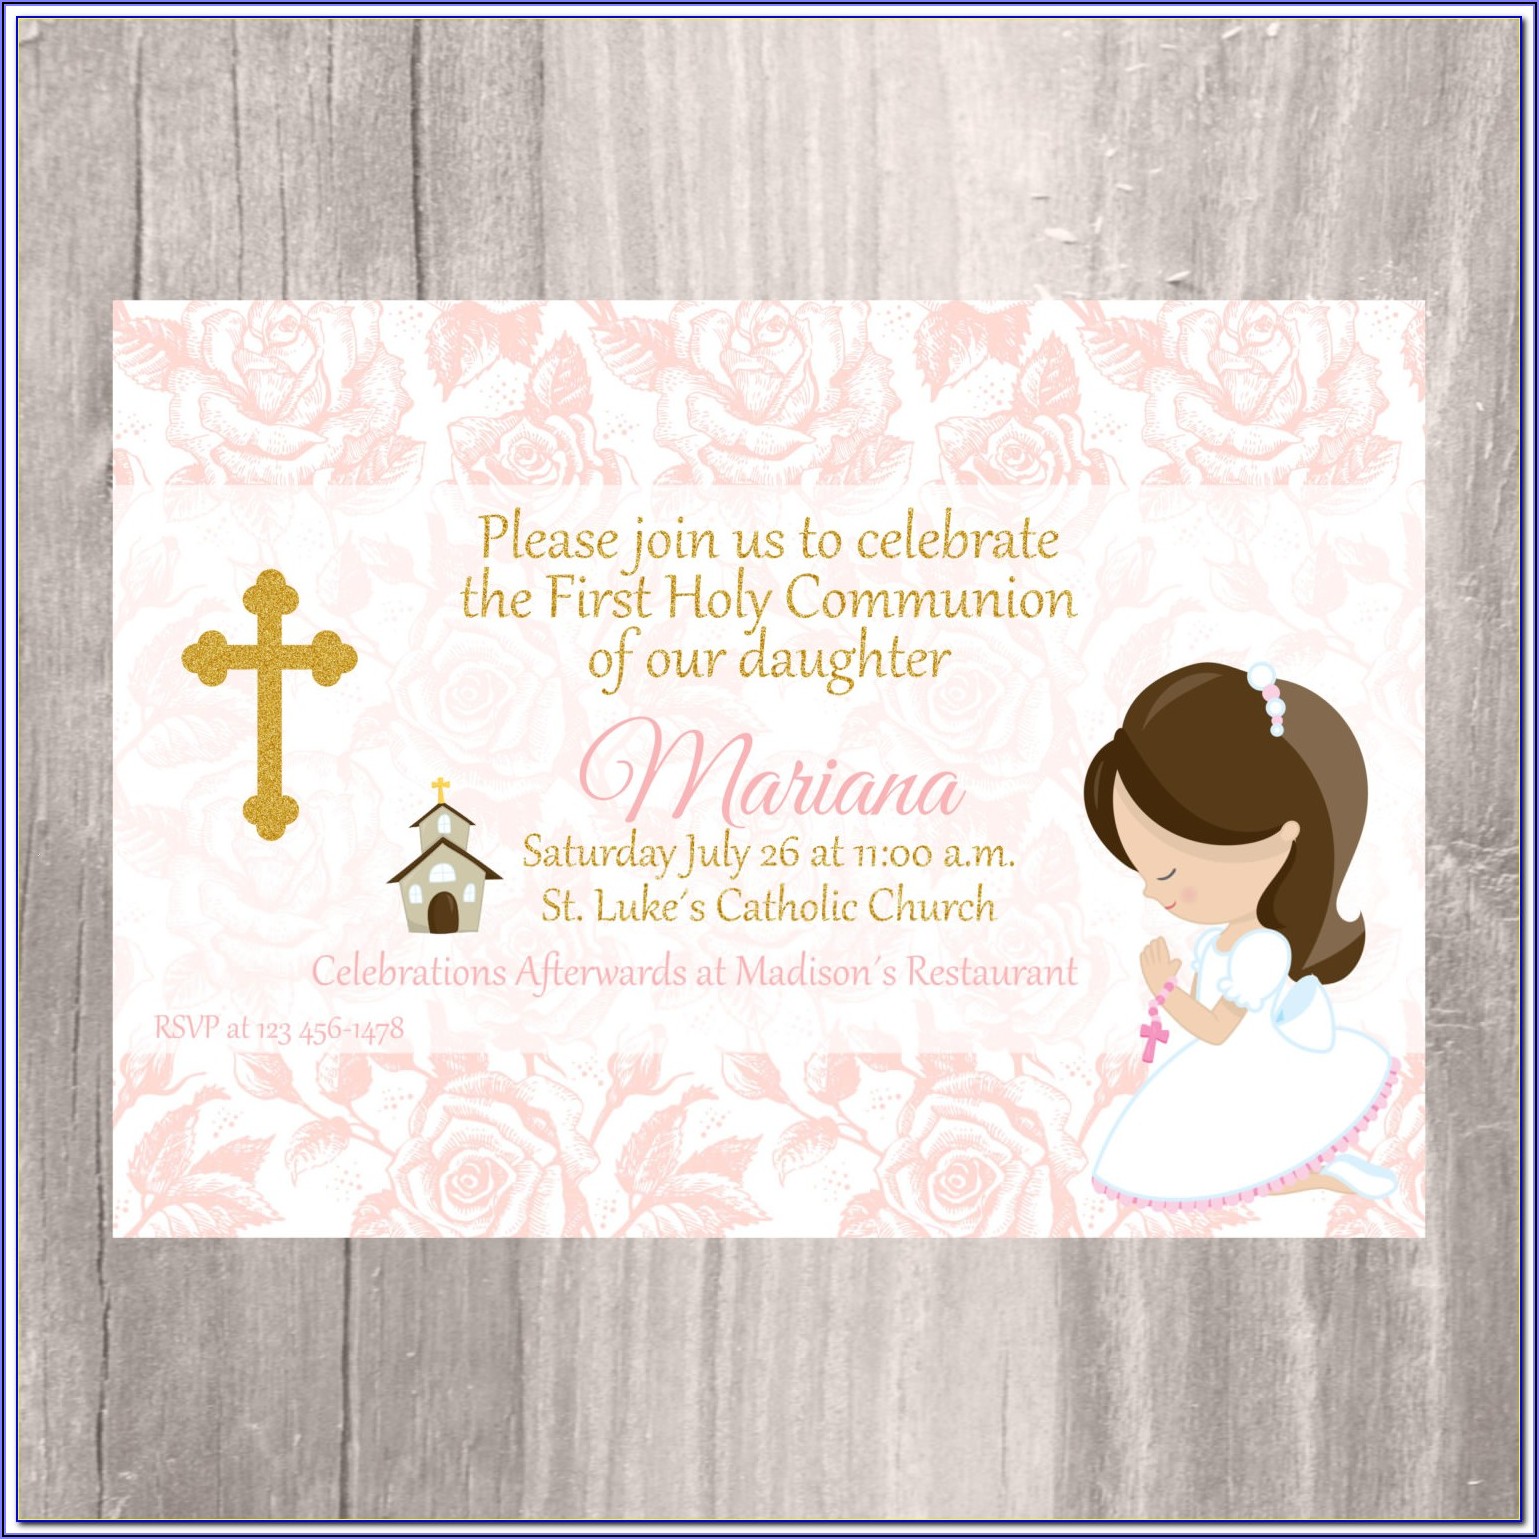 First Holy Communion Invitation Card Wording